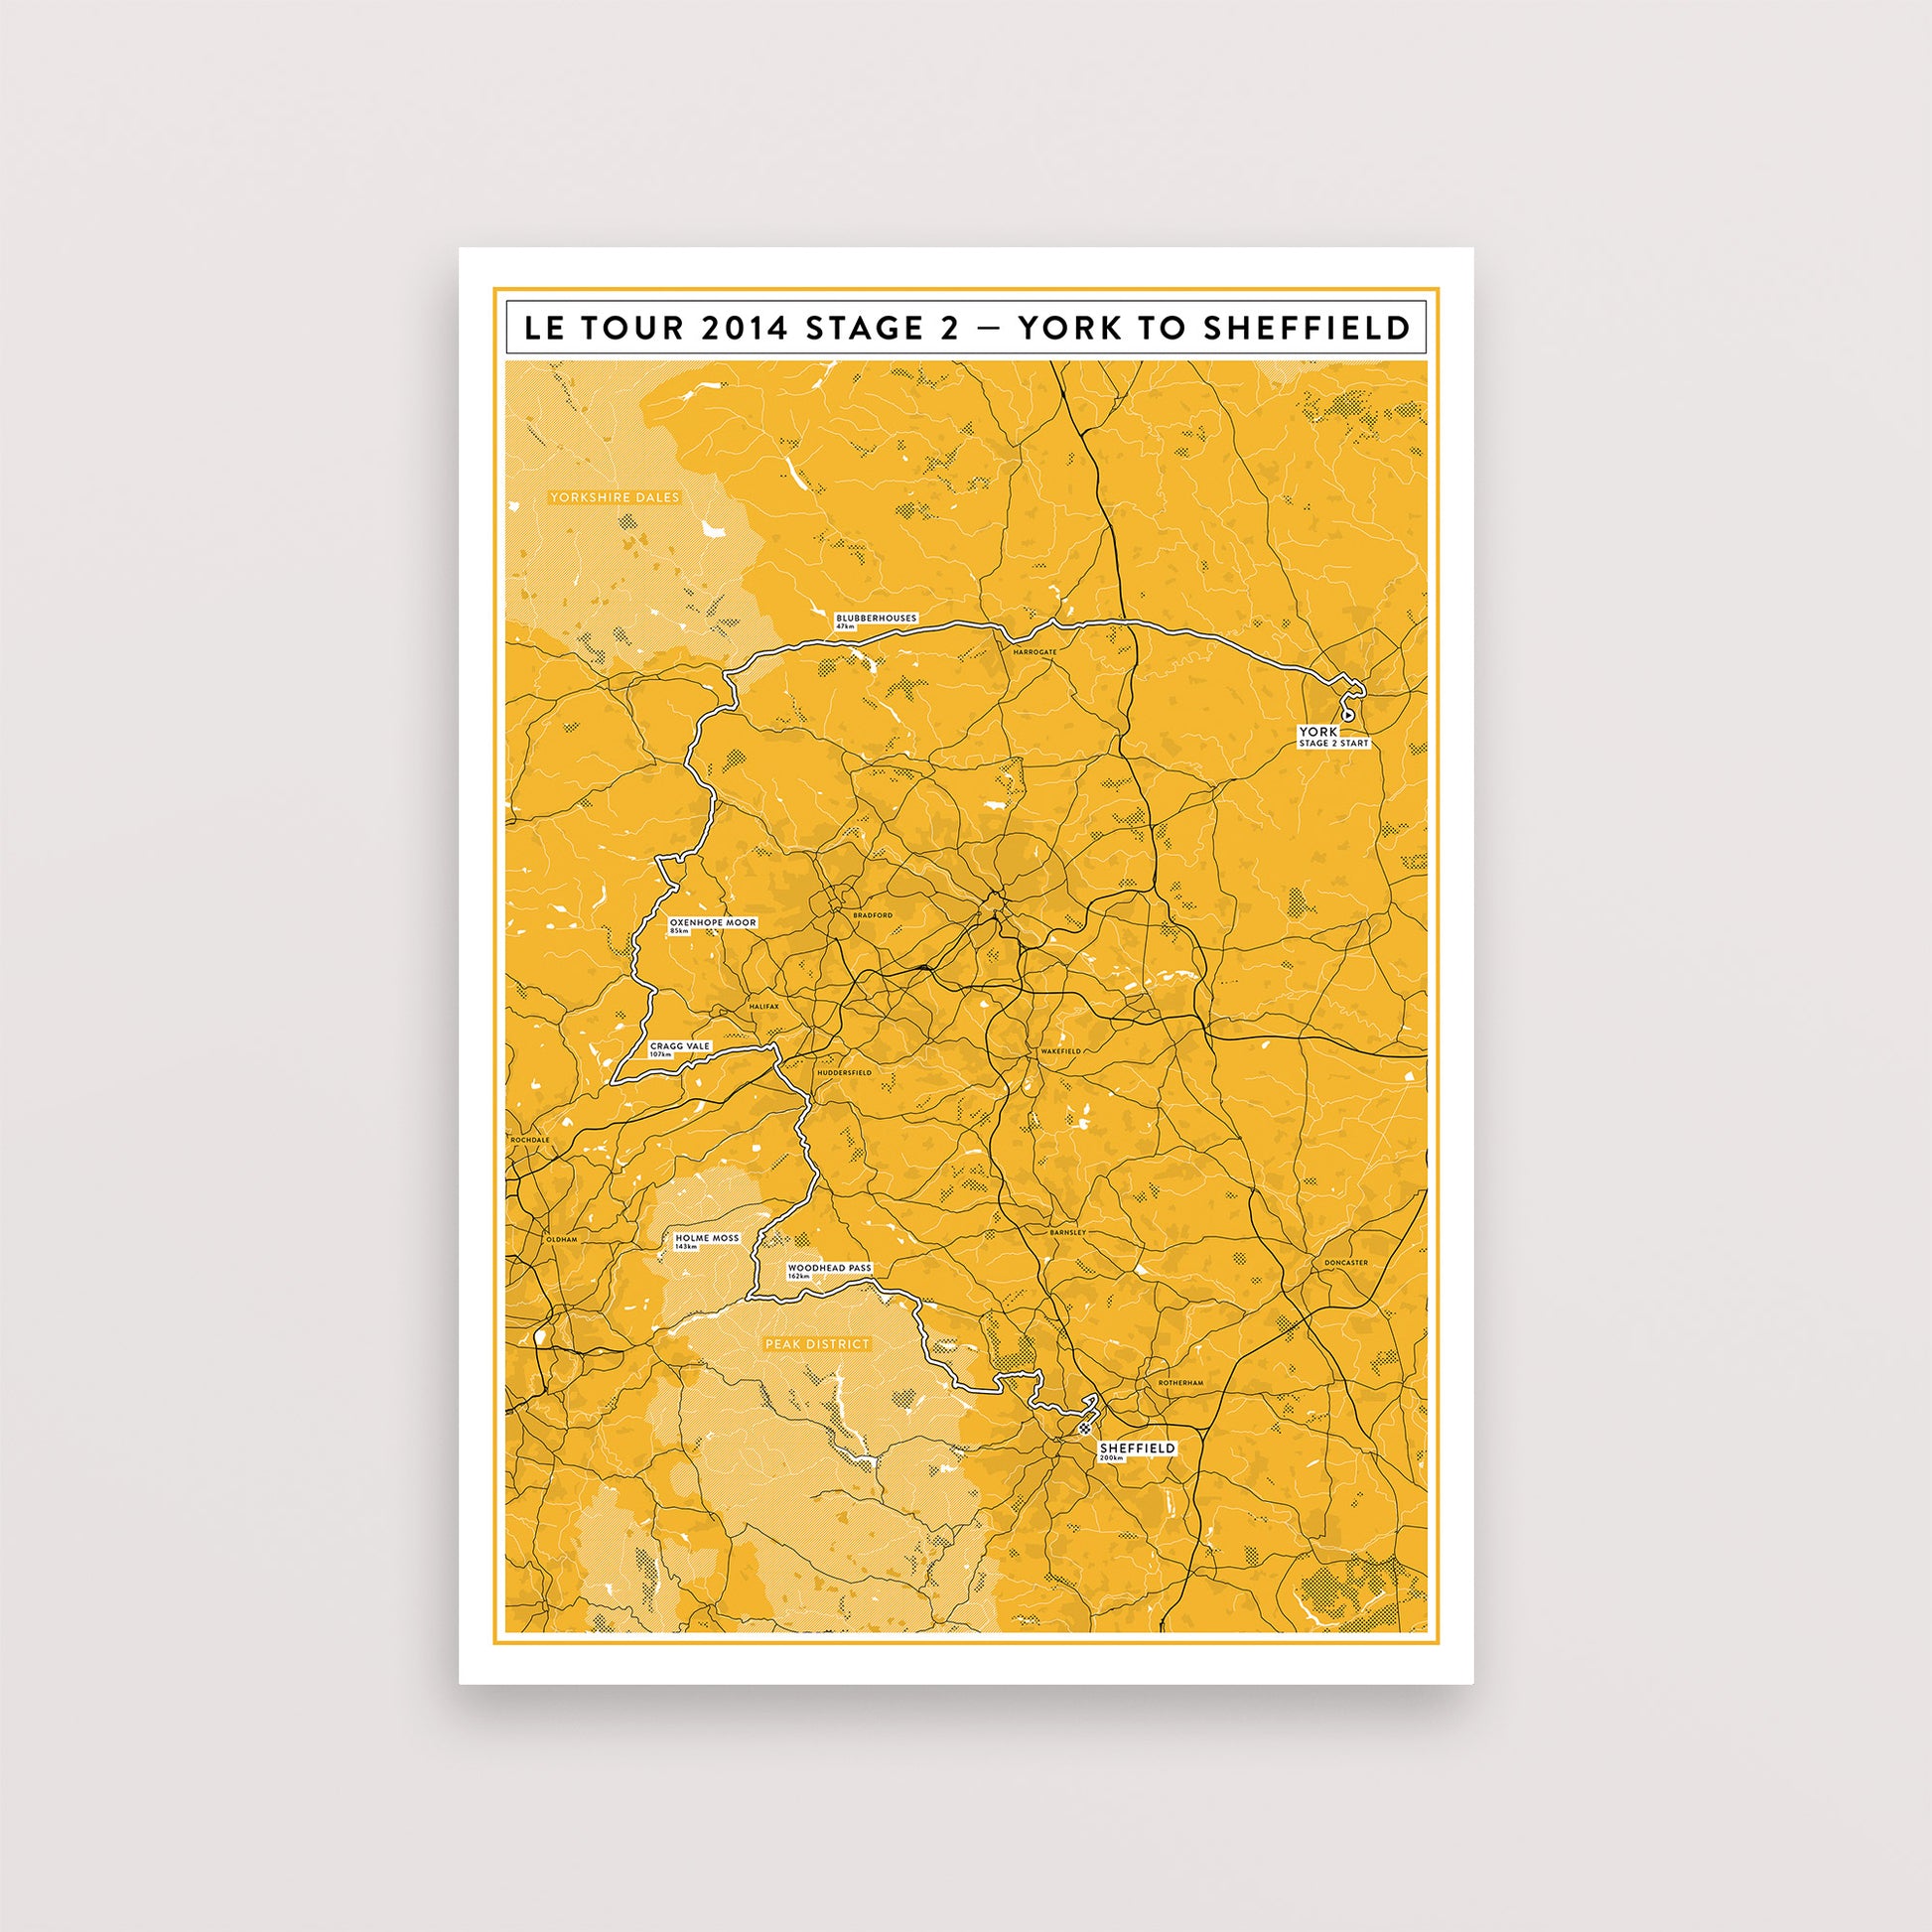 Tour de France 2014 Stage 2 Map Yorkshire – Poster – The English Cyclist